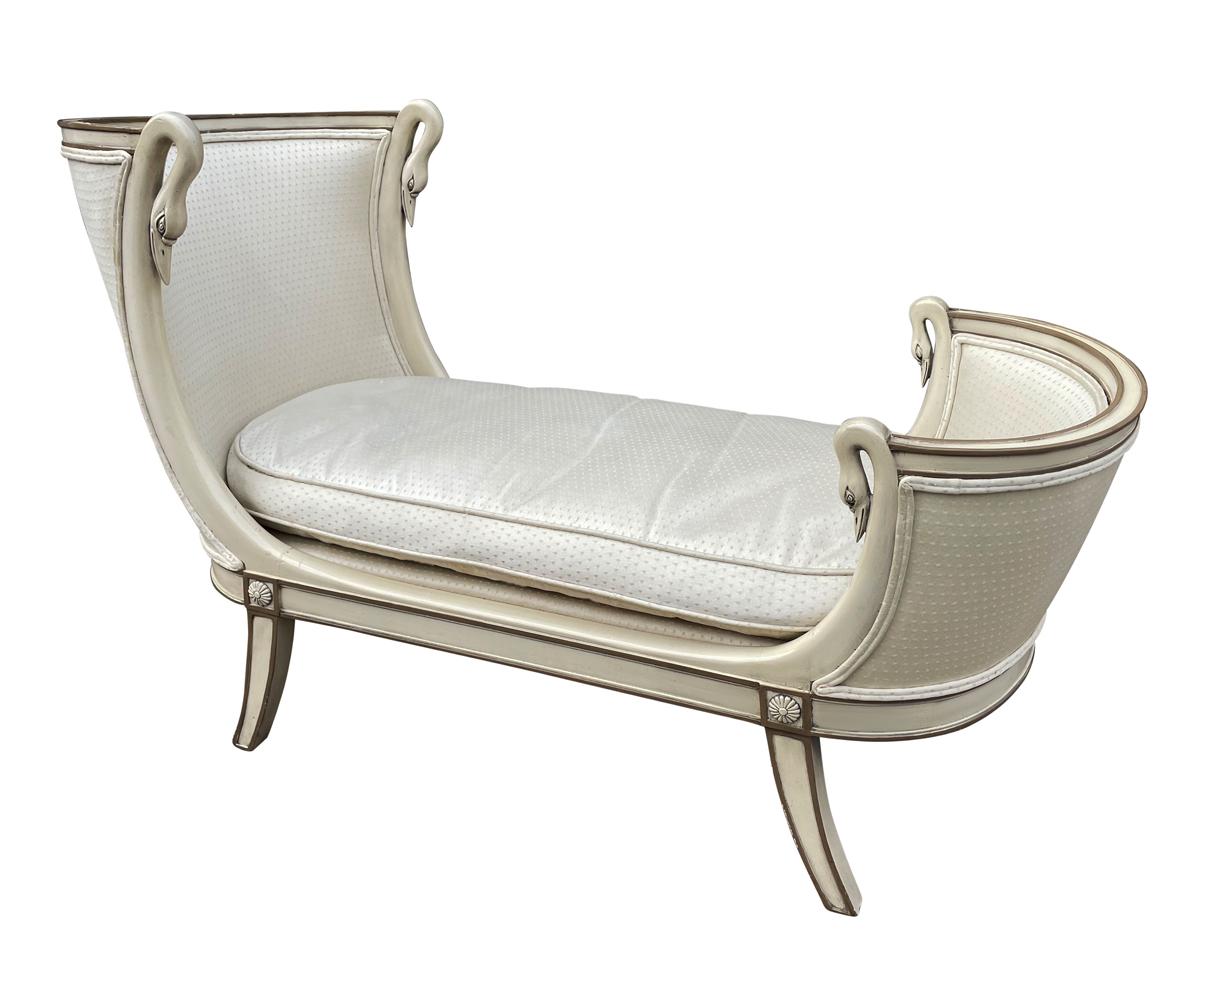 Hollywood Regency Italian Petite Chaise Lounge Chair in Cream with Swan Heads In Good Condition For Sale In Philadelphia, PA